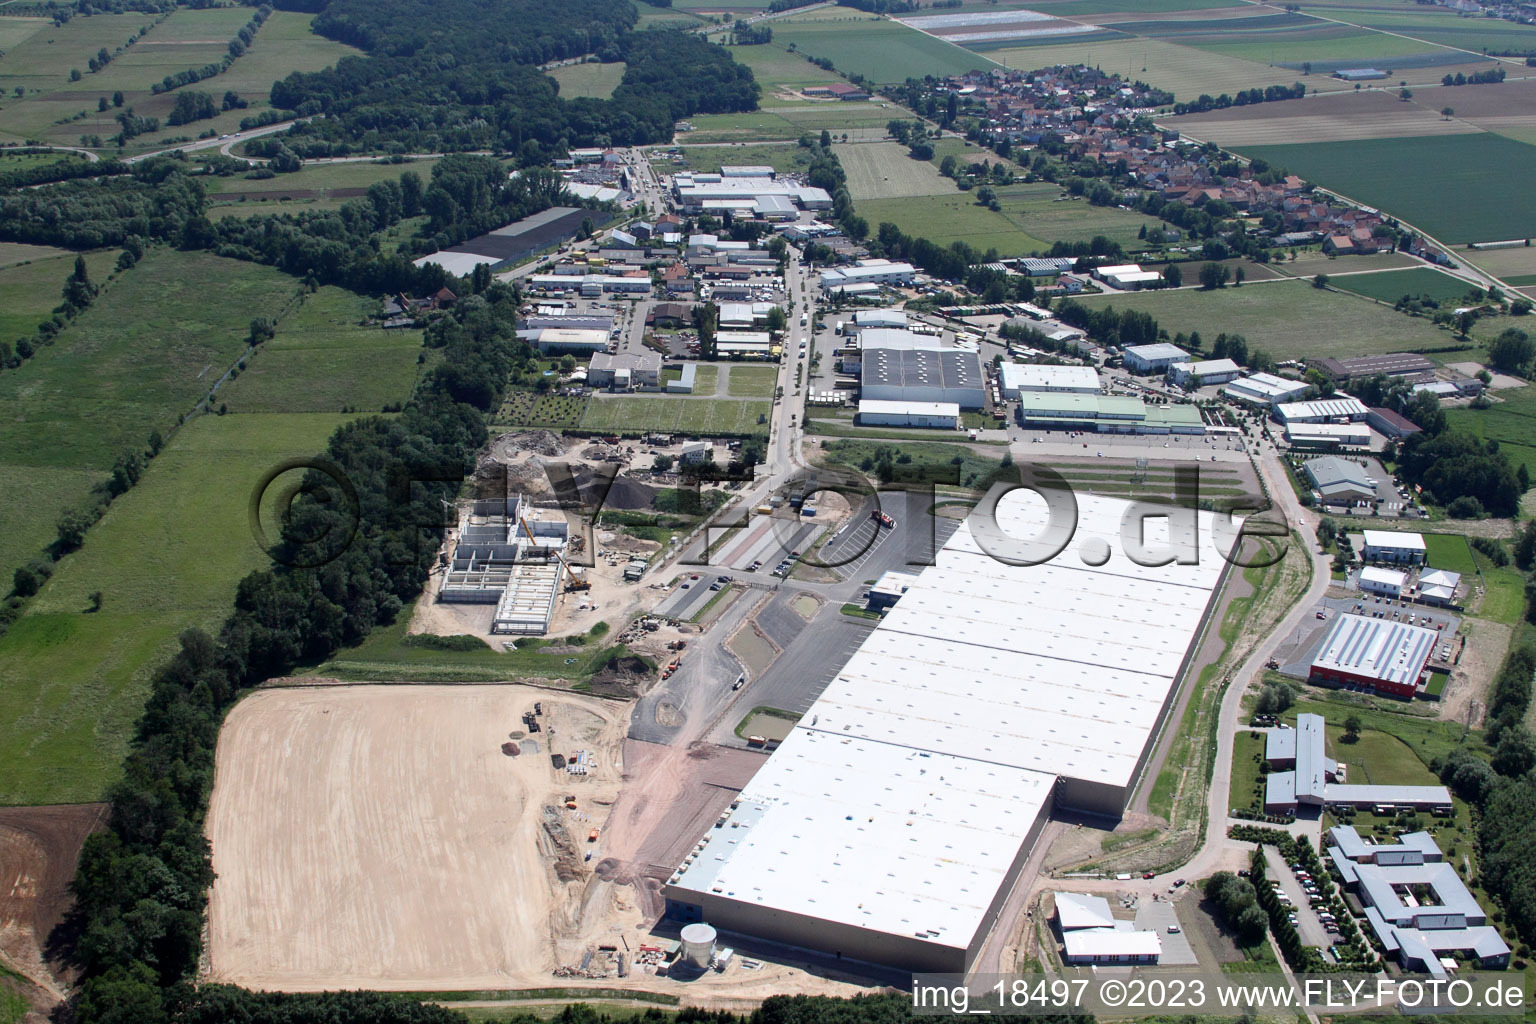 Aerial photograpy of Coincidence logistics center in the district Minderslachen in Kandel in the state Rhineland-Palatinate, Germany